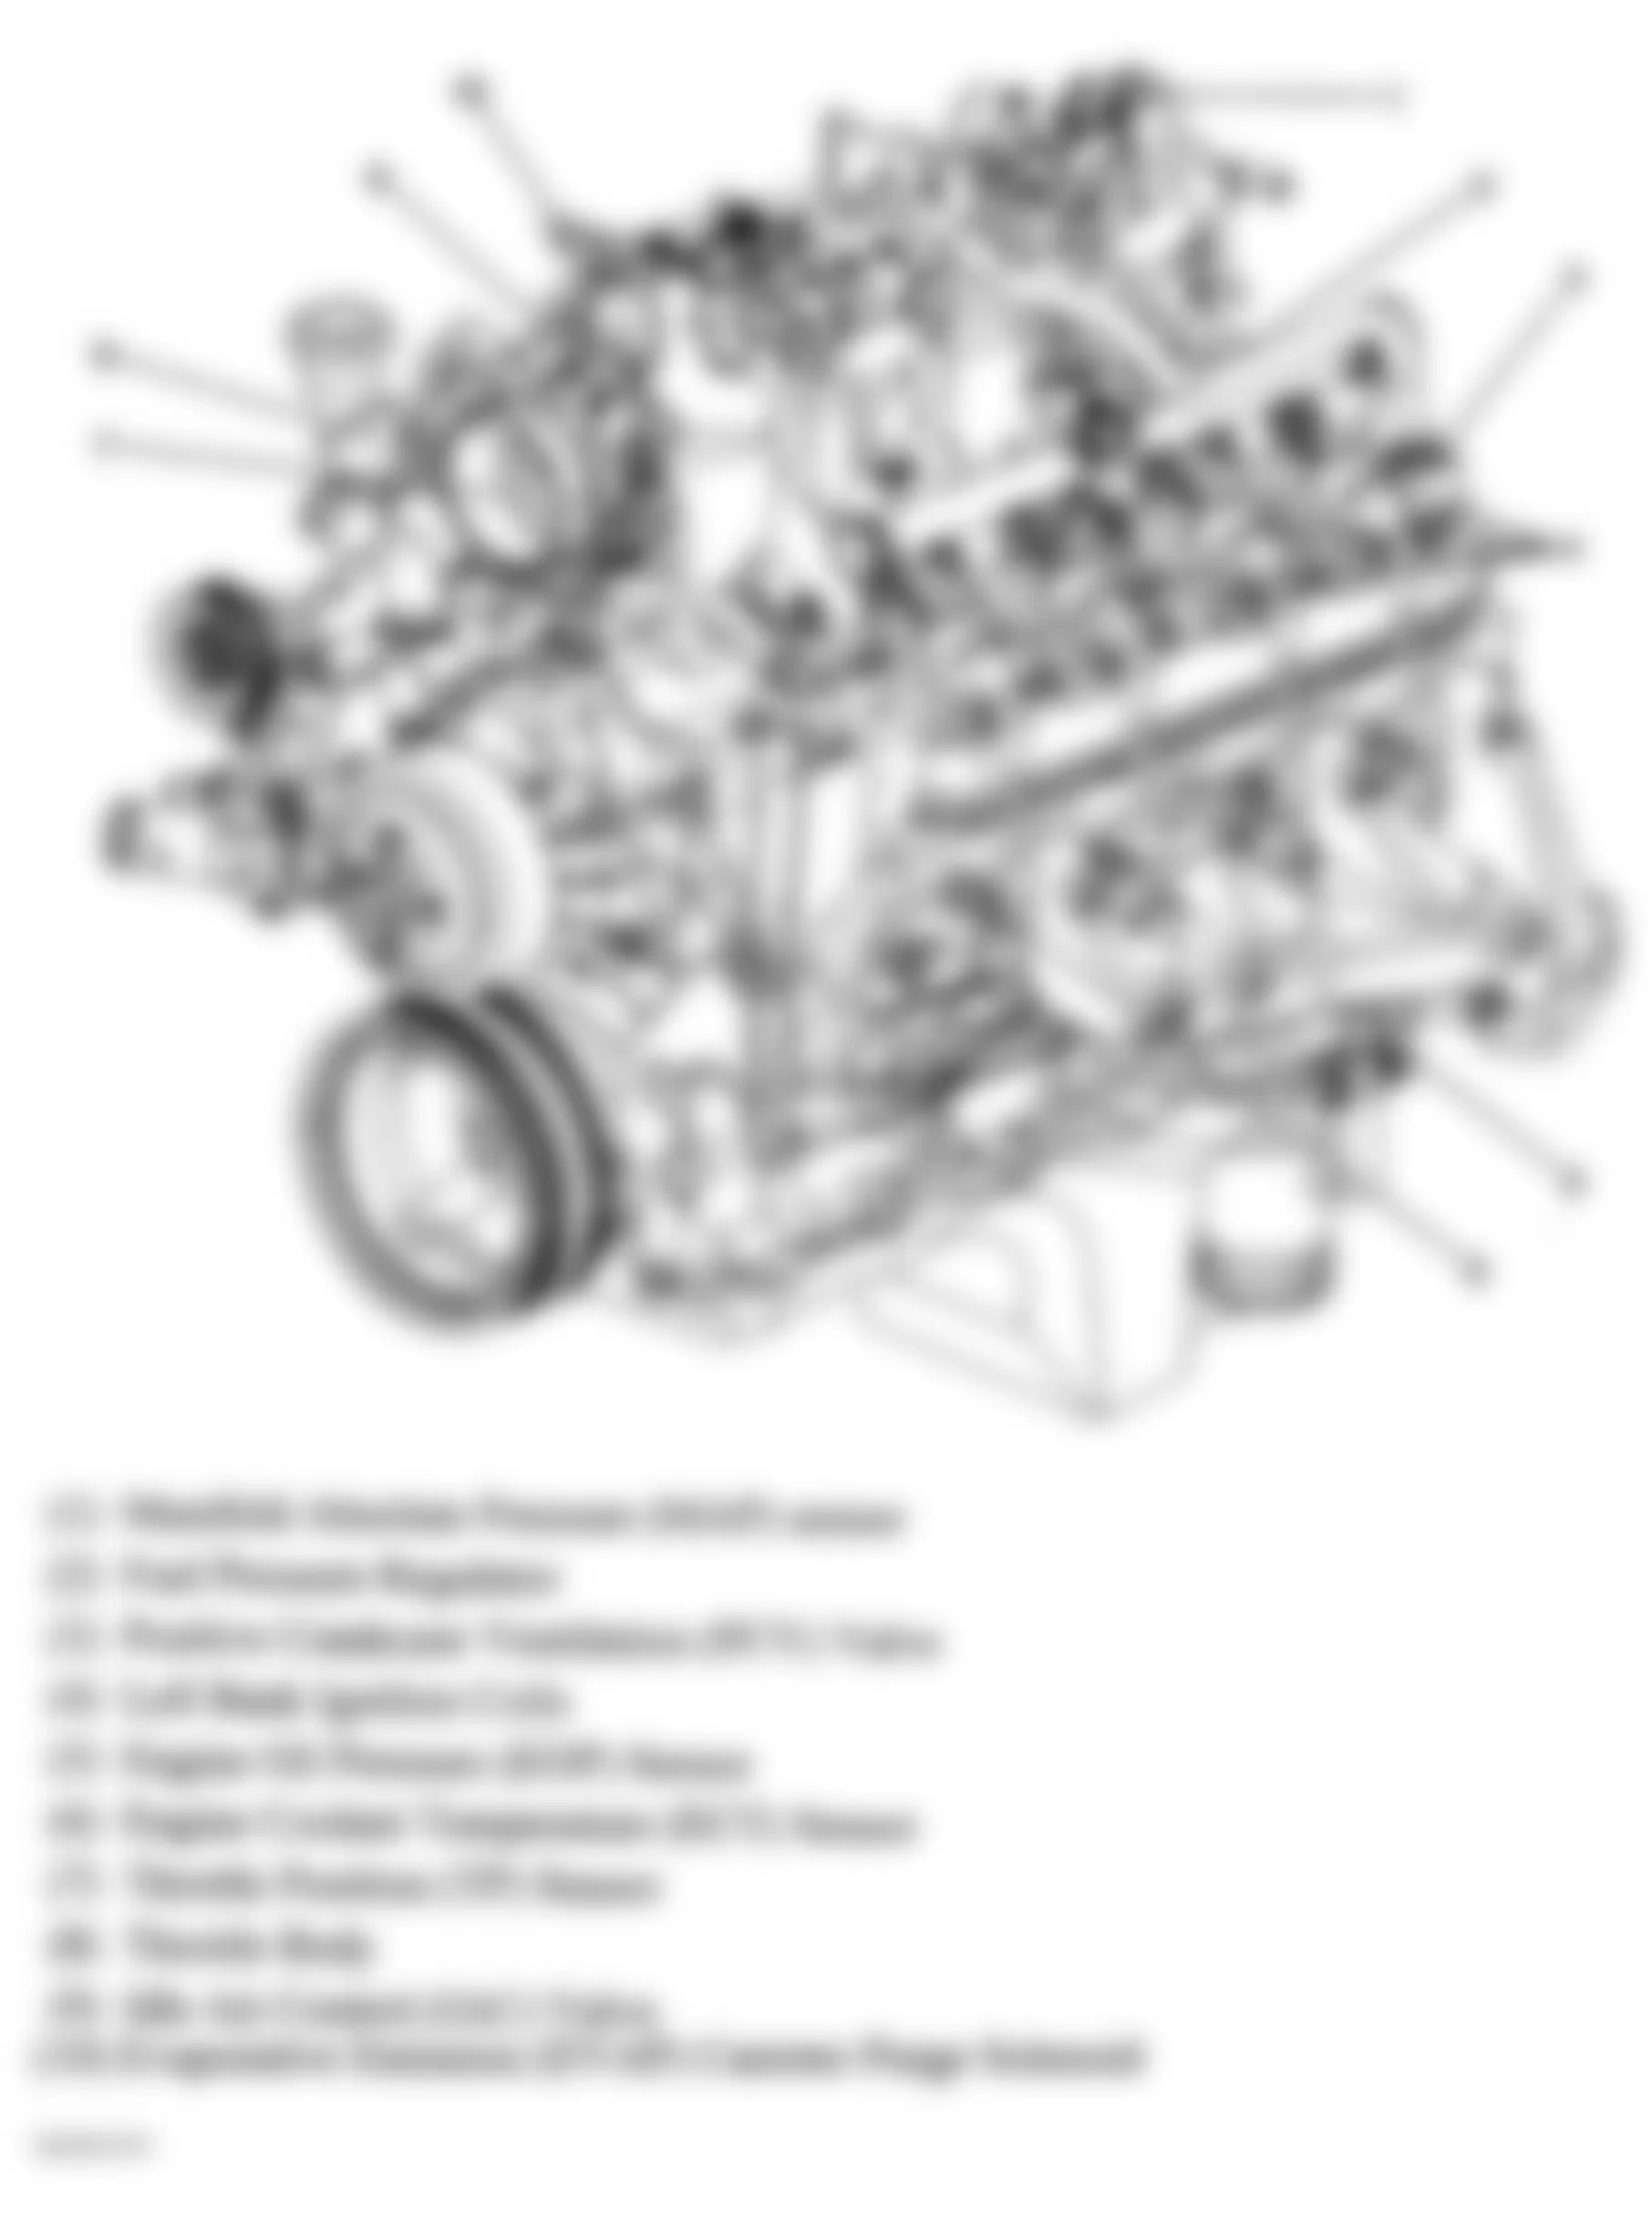 Chevrolet Avalanche 2500 2004 - Component Locations -  Left Side Of Engine (4.8L, 5.3L & 6.0L)